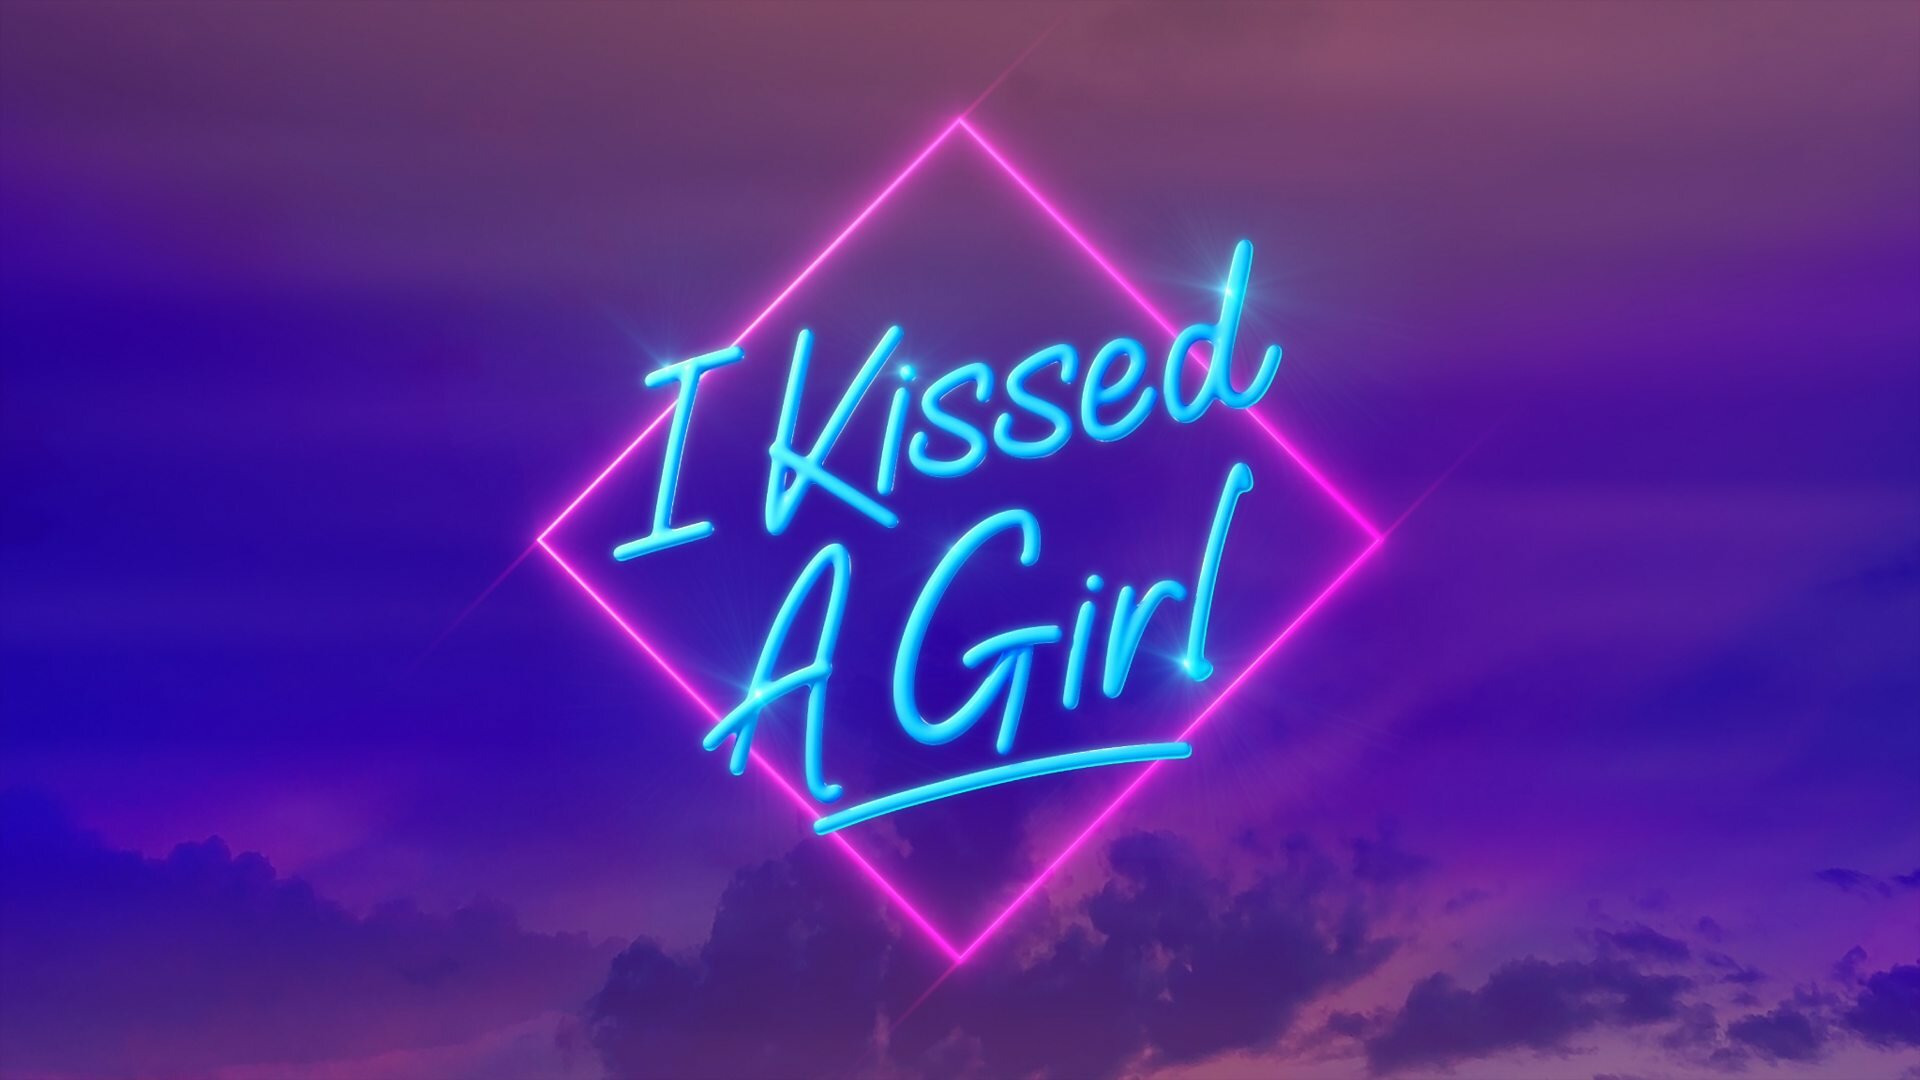 Show I Kissed a Girl